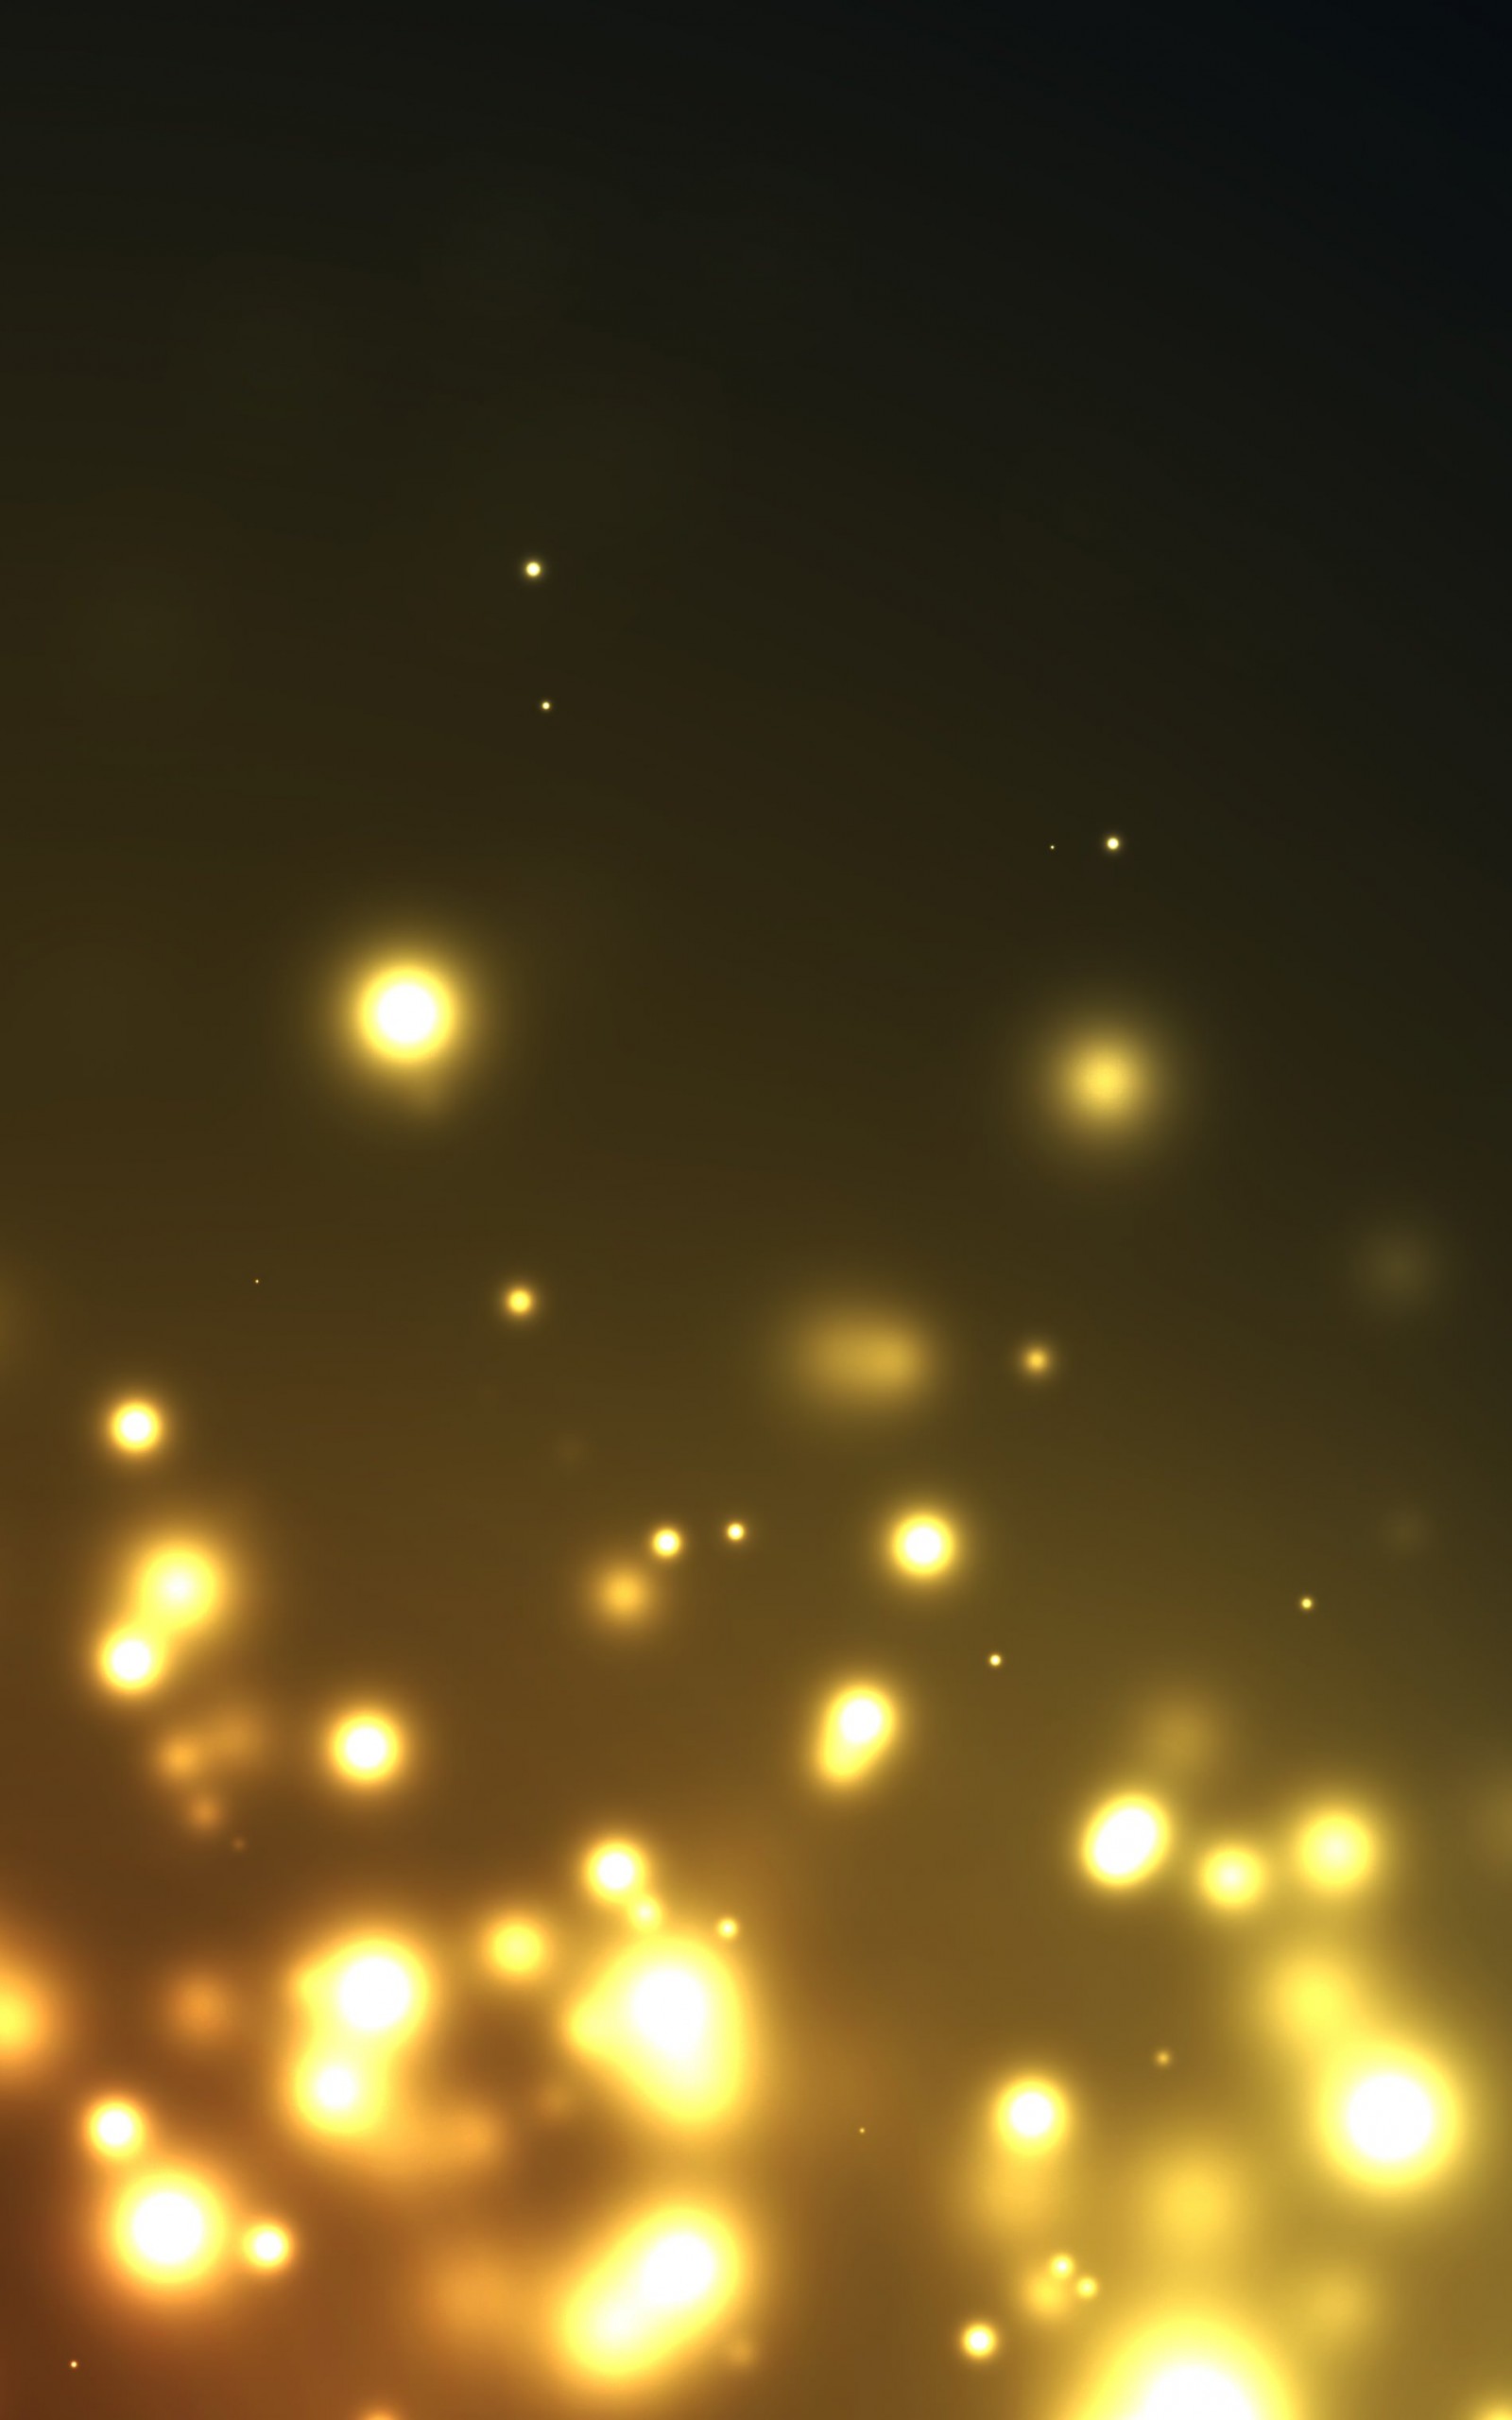 Floating Particles Wallpaper for Amazon Kindle Fire HDX 8.9